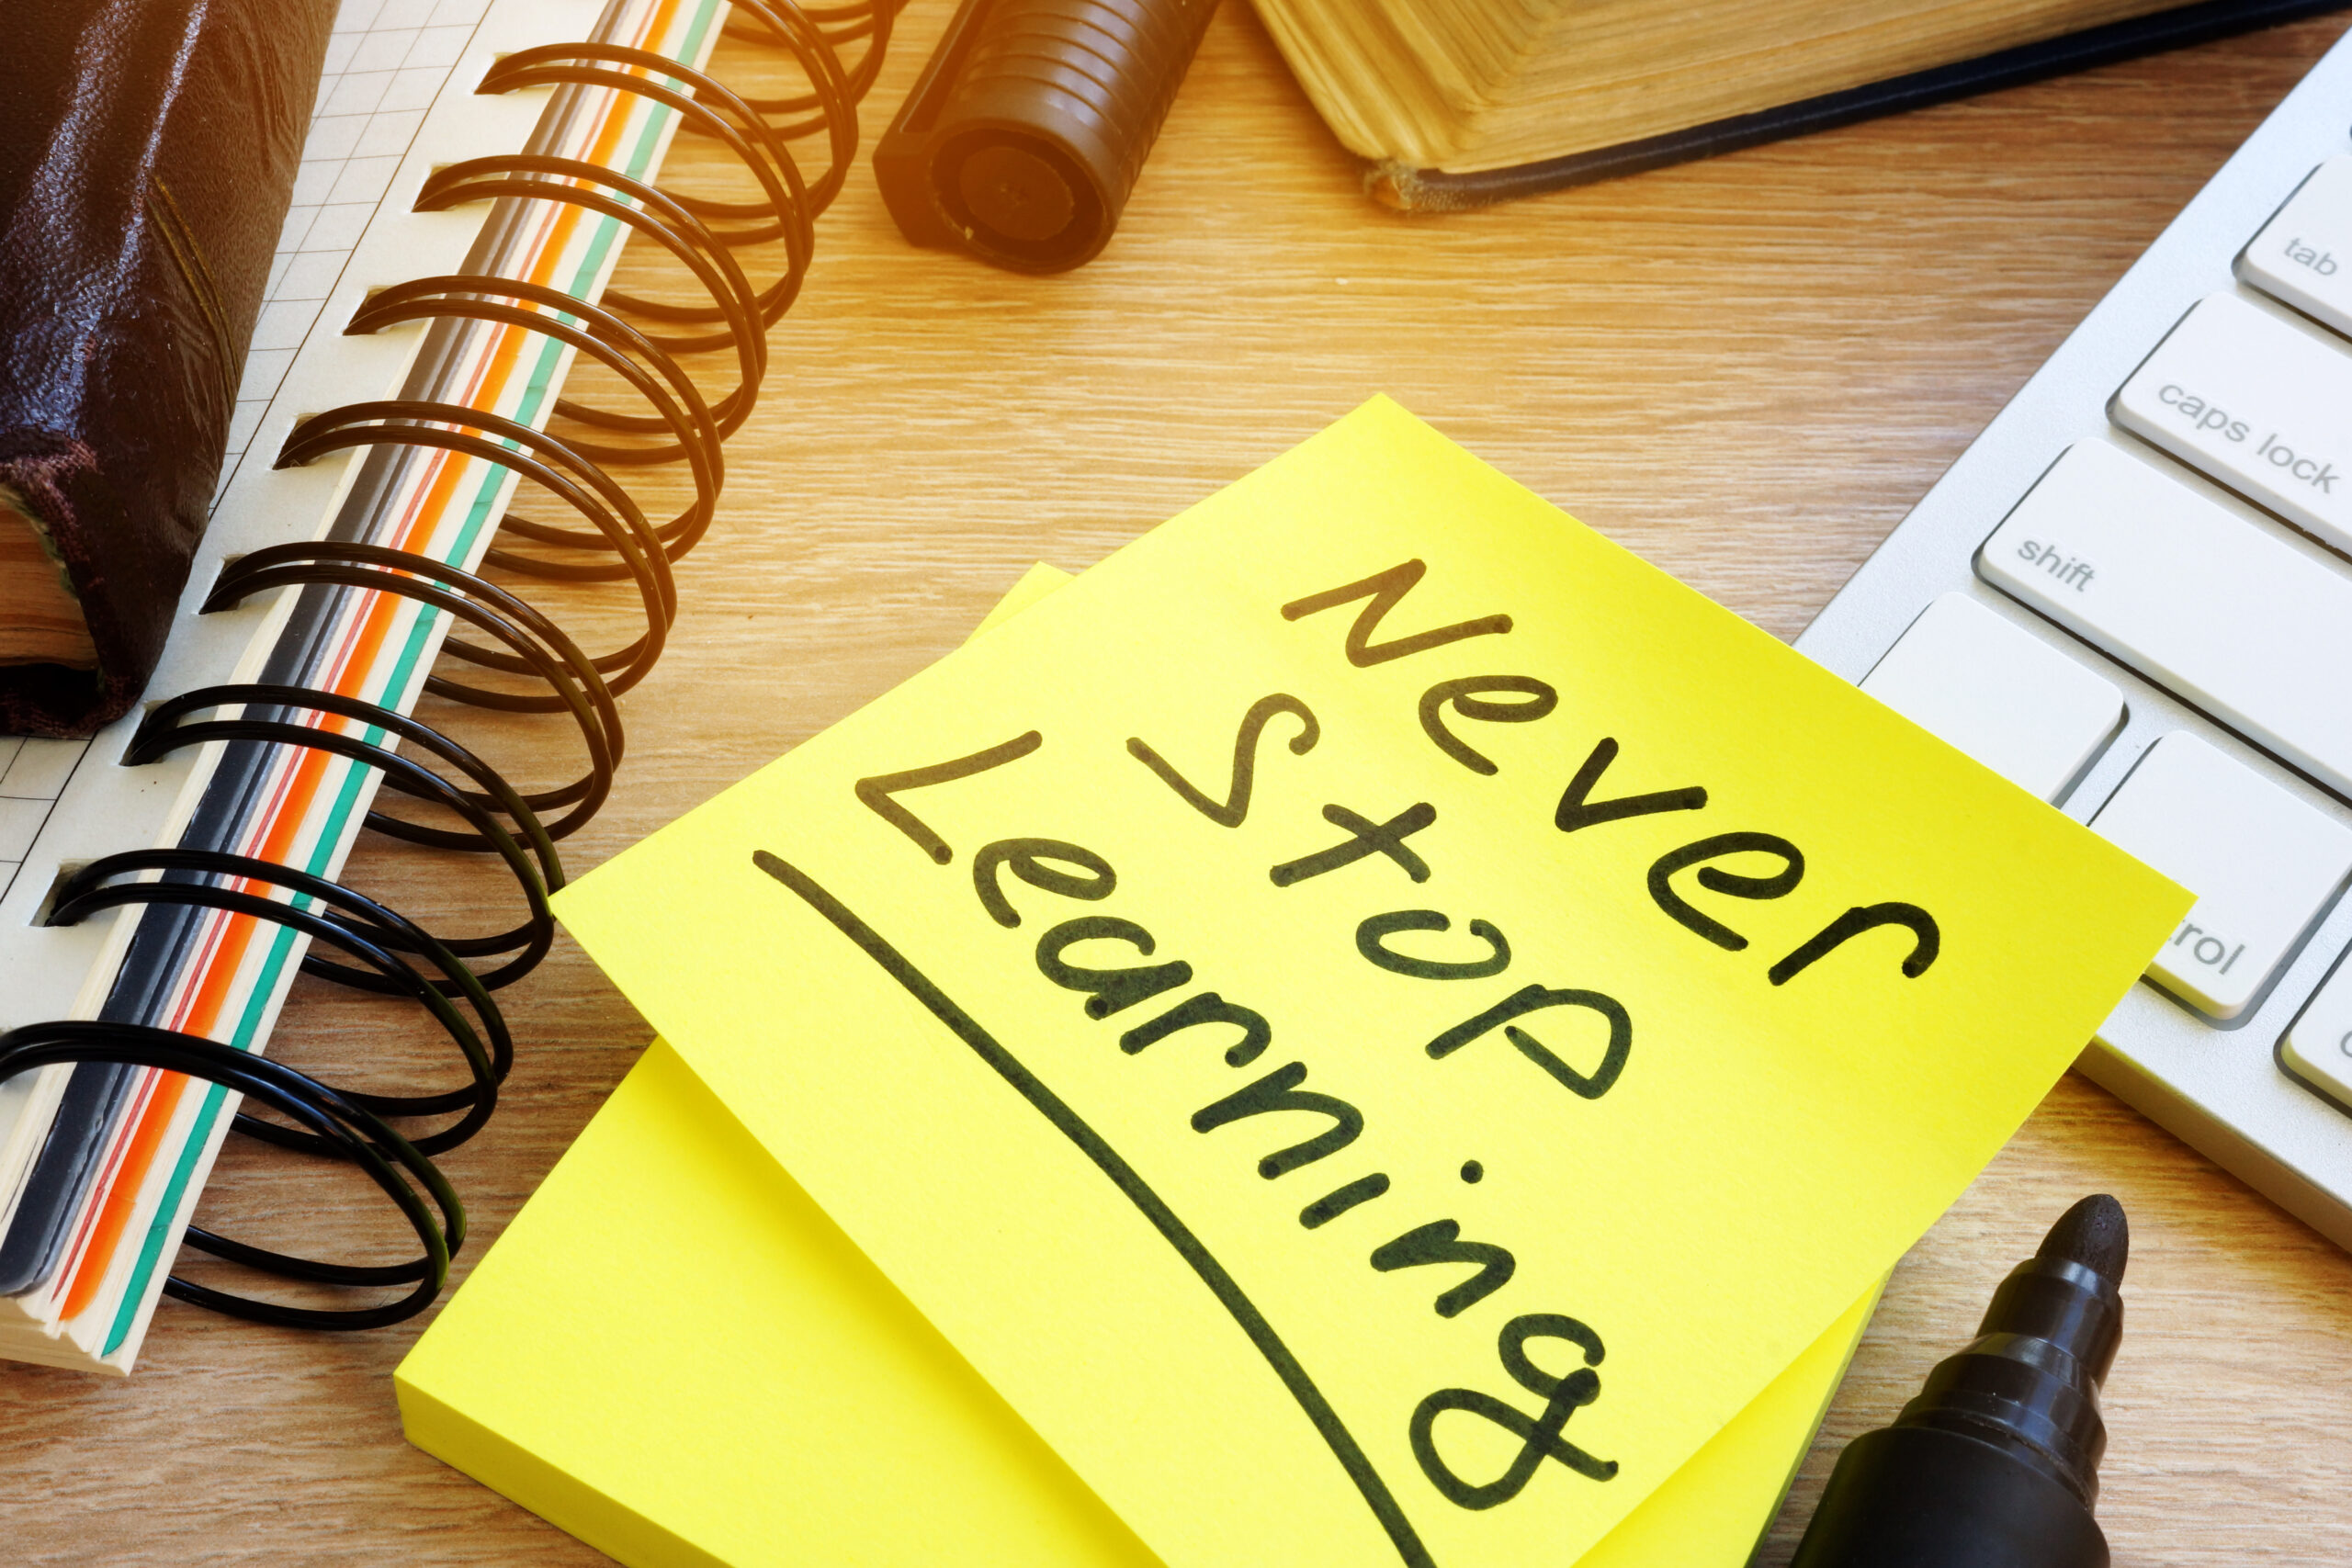 Achieving excellence through lifelong learning: insights for modern marketers